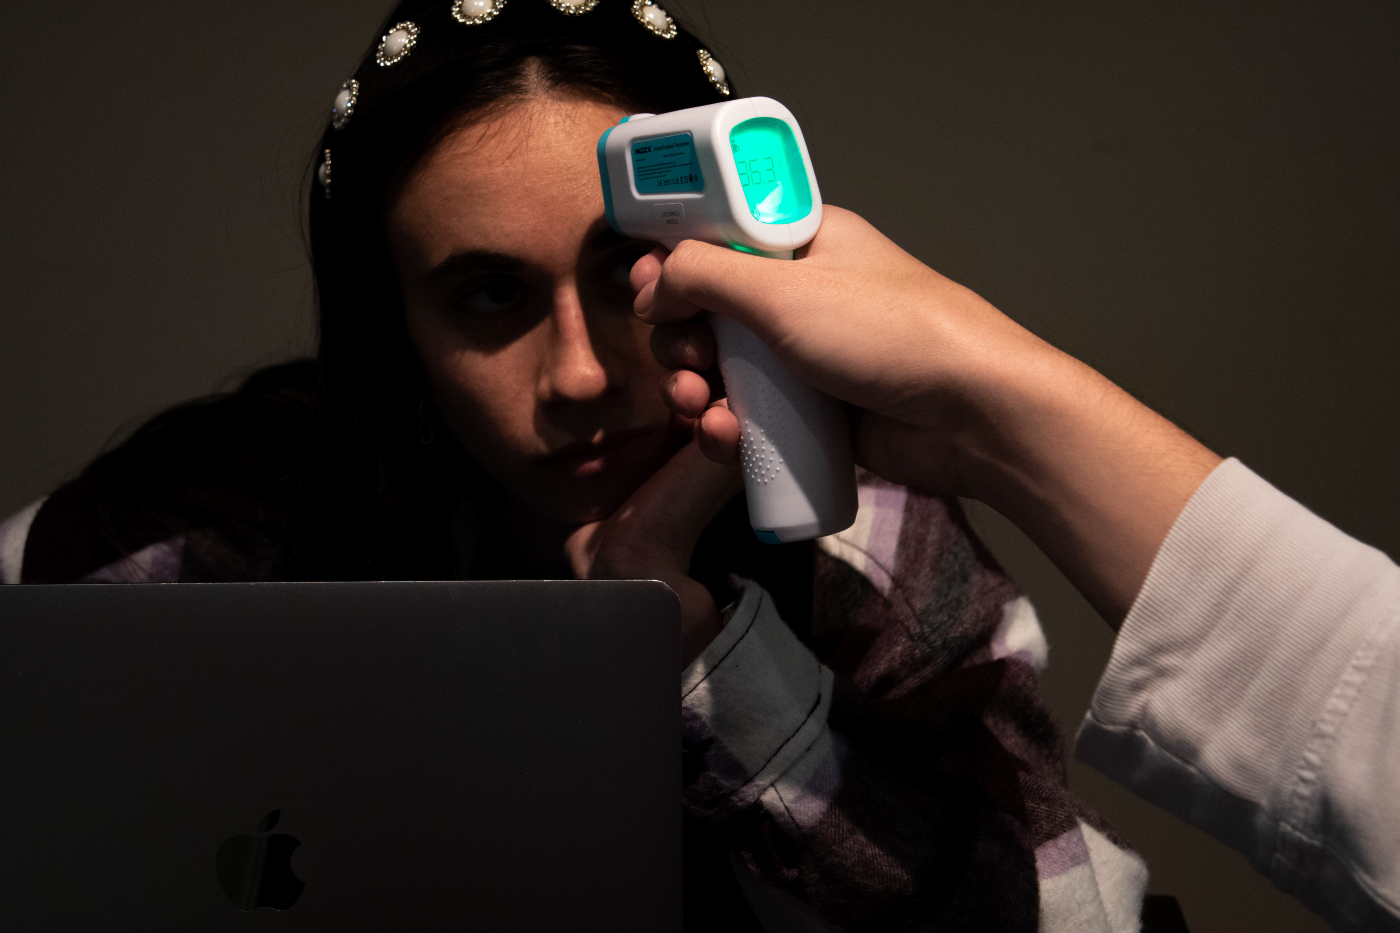 photo of person getting temperature taken with device